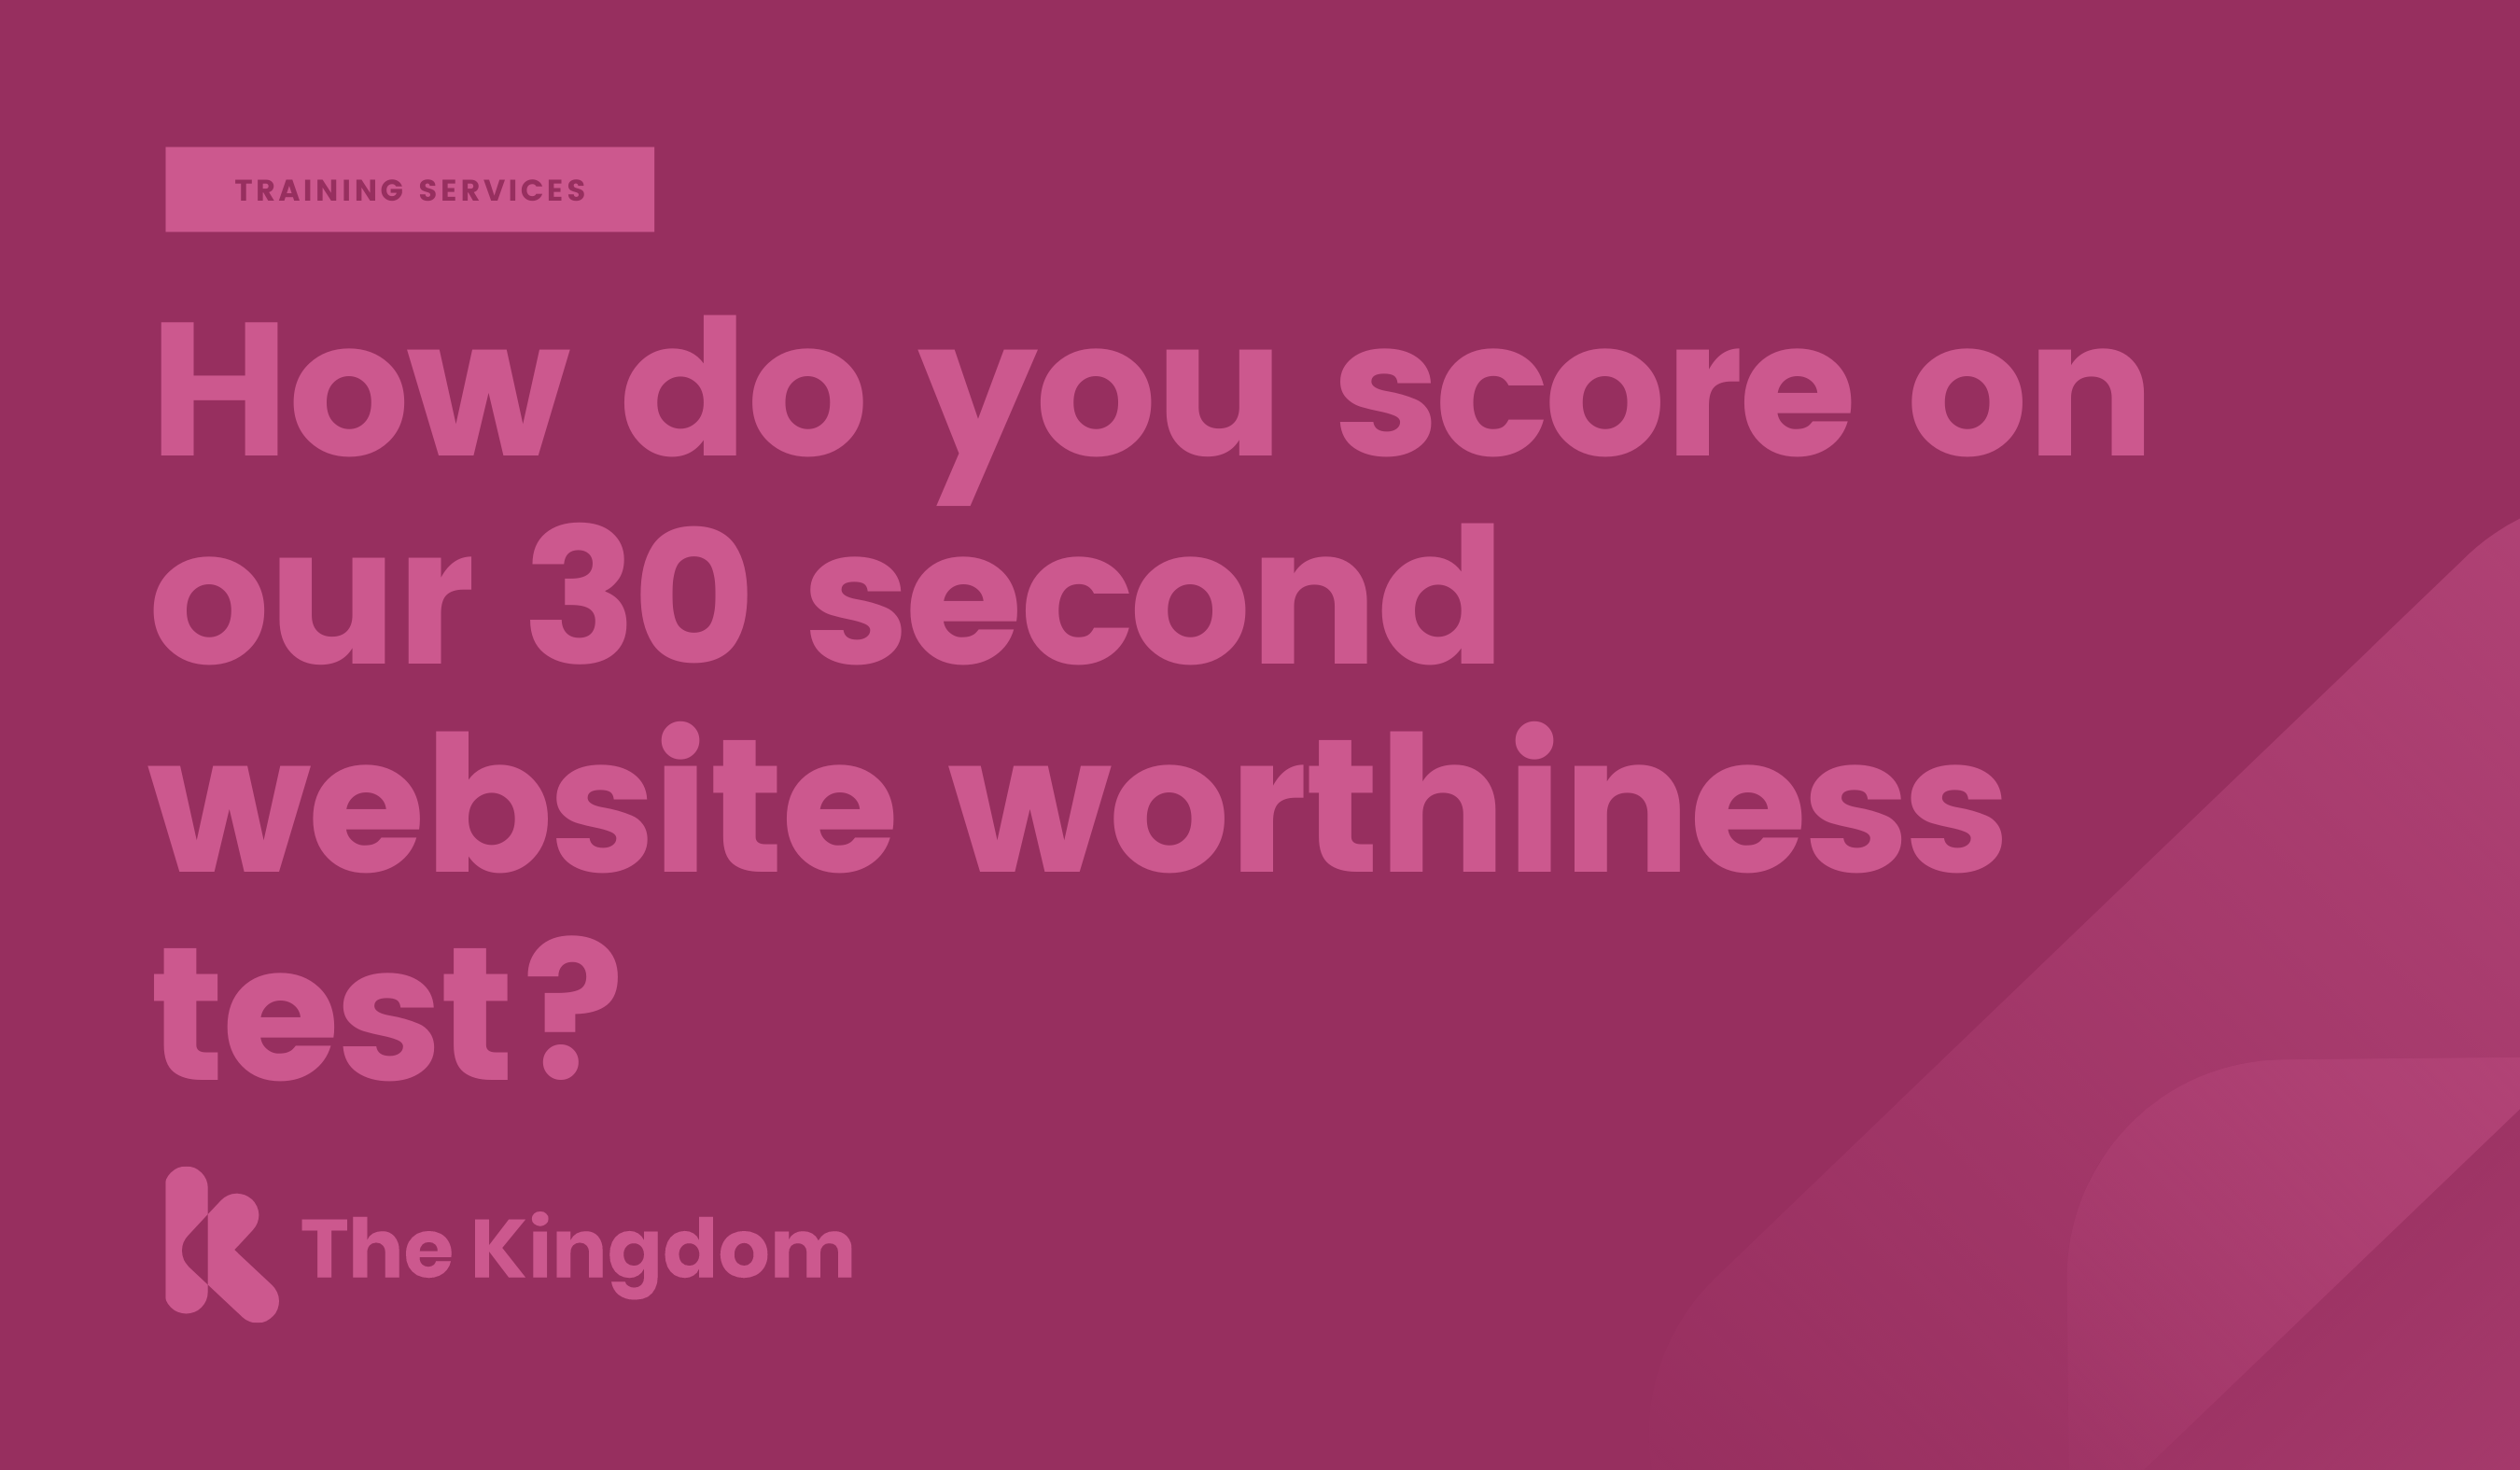 How do you score on our 30 second website worthiness test?